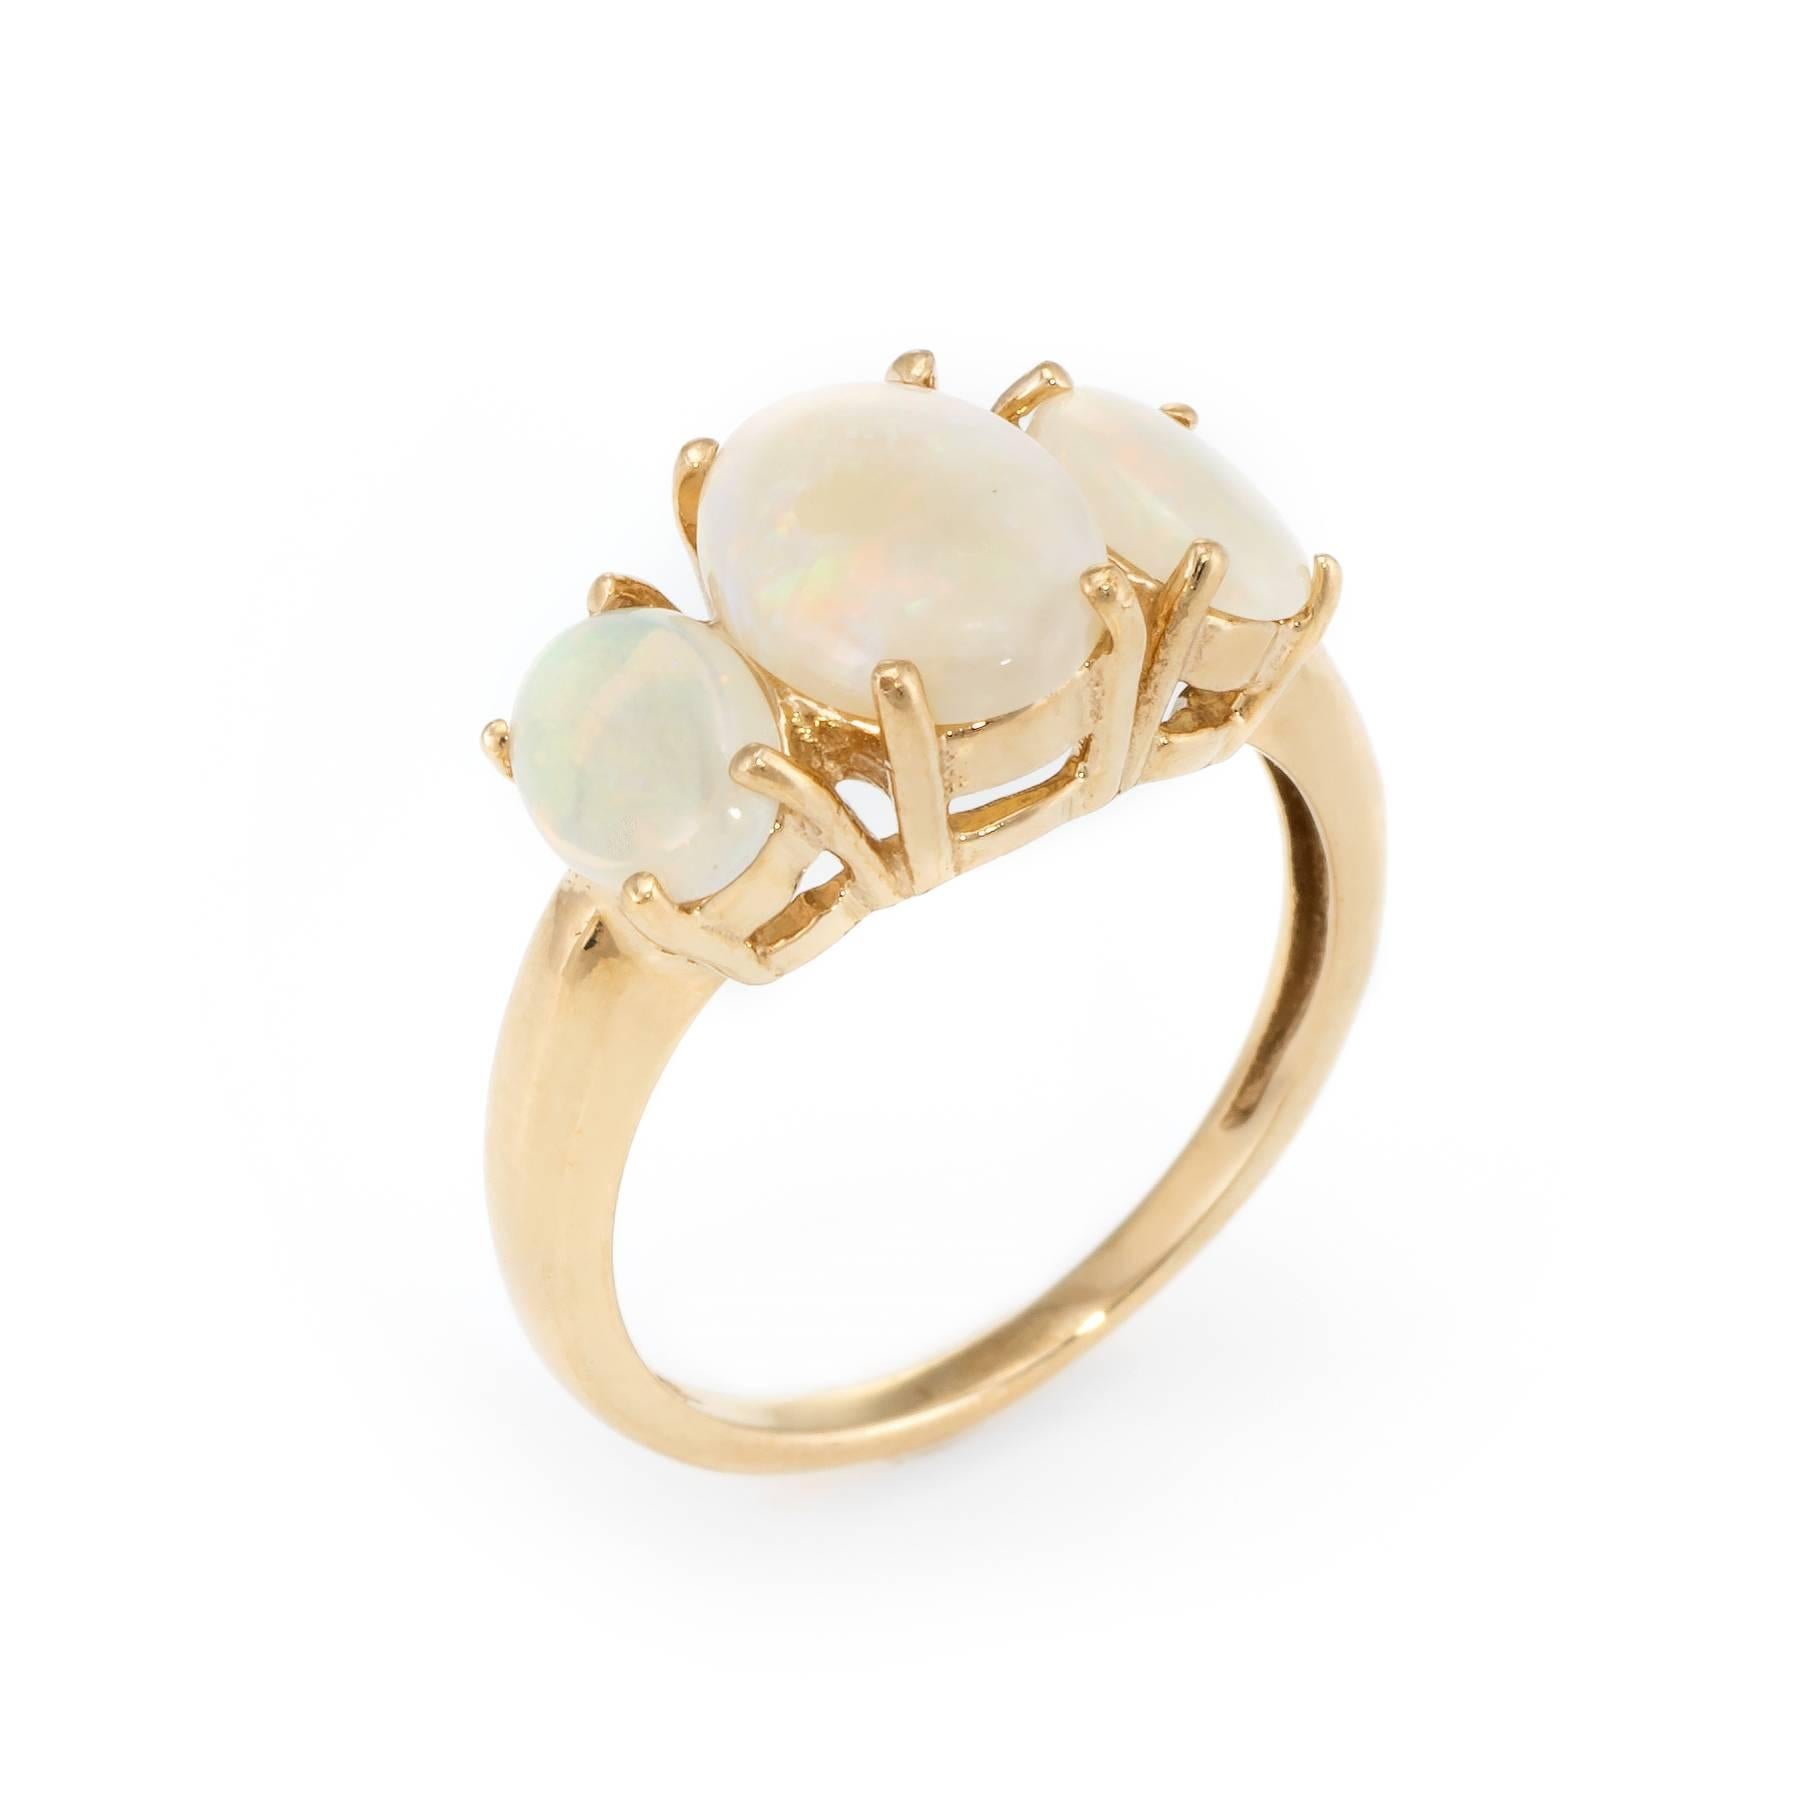 Elegant vintage 3 stone opal ring, crafted in 10 karat yellow gold. 

Oval cut opals range in size from 7mm x 5mm (outer - estimated at 1.50 carats) 9mm x 7mm (center - estimated at 2 carats). The total opal weight is estimated at 3.50 carats. The